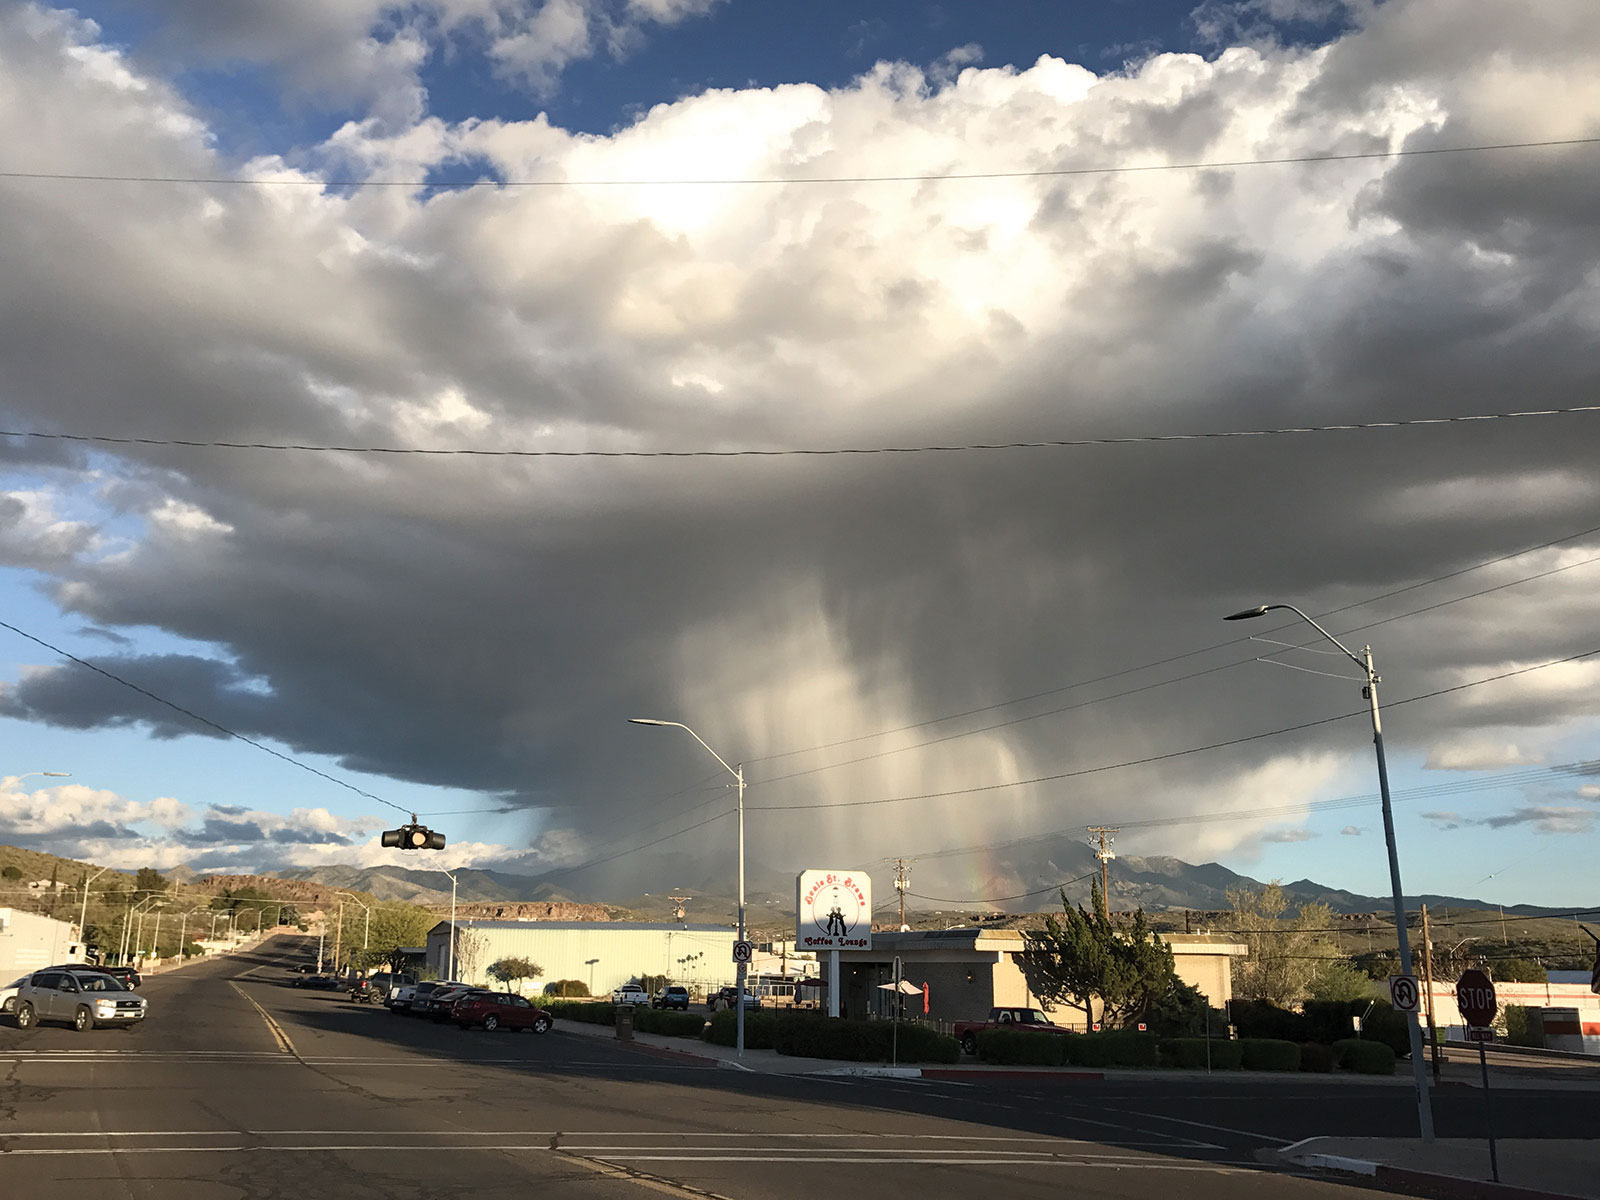 Kingman: Windy conditions expected for the next few days | Kingman Daily Miner ...1600 x 1200